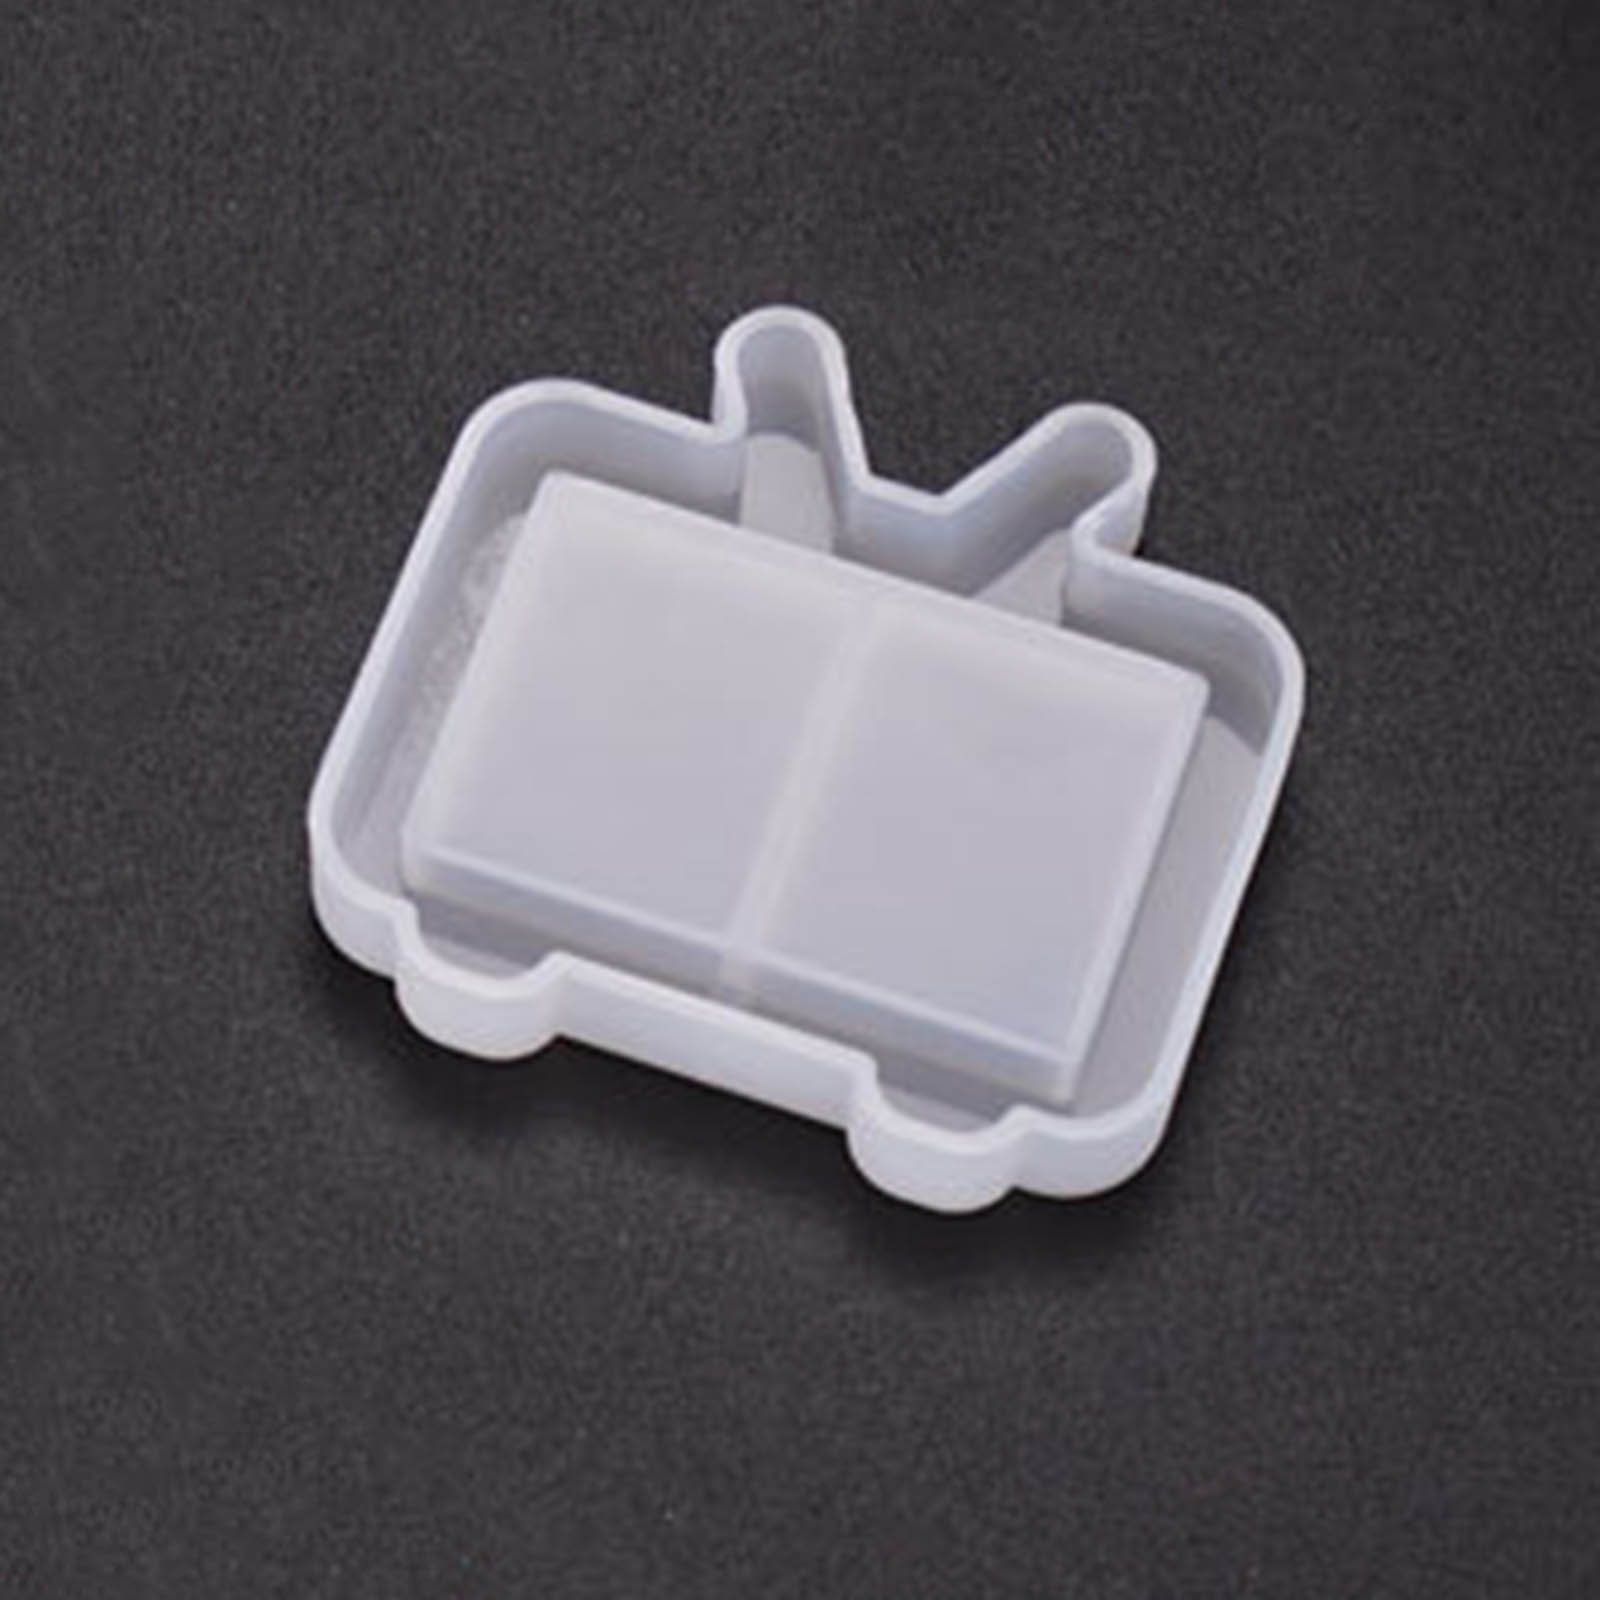 Picture of Silicone Resin Mold For Jewelry Making Pendant Ornaments Television White 5.3cm x 4.8cm, 1 Piece